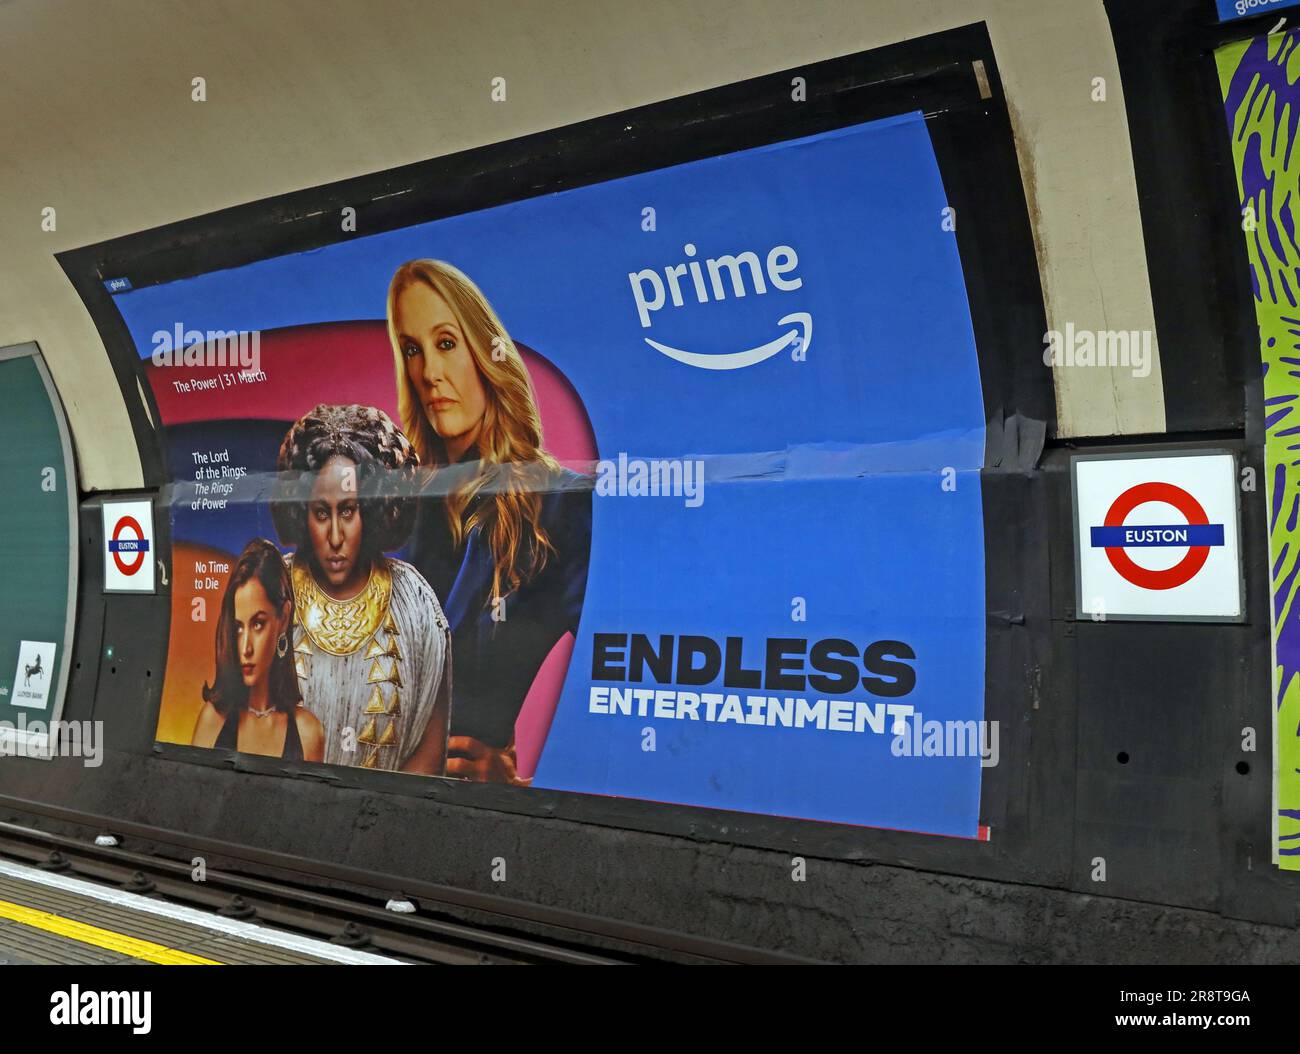 Amazon Prime Endless Entertainment advert on the London underground tube, at Euston station.- The Power, No Time To Die, Lord of the rings Stock Photo